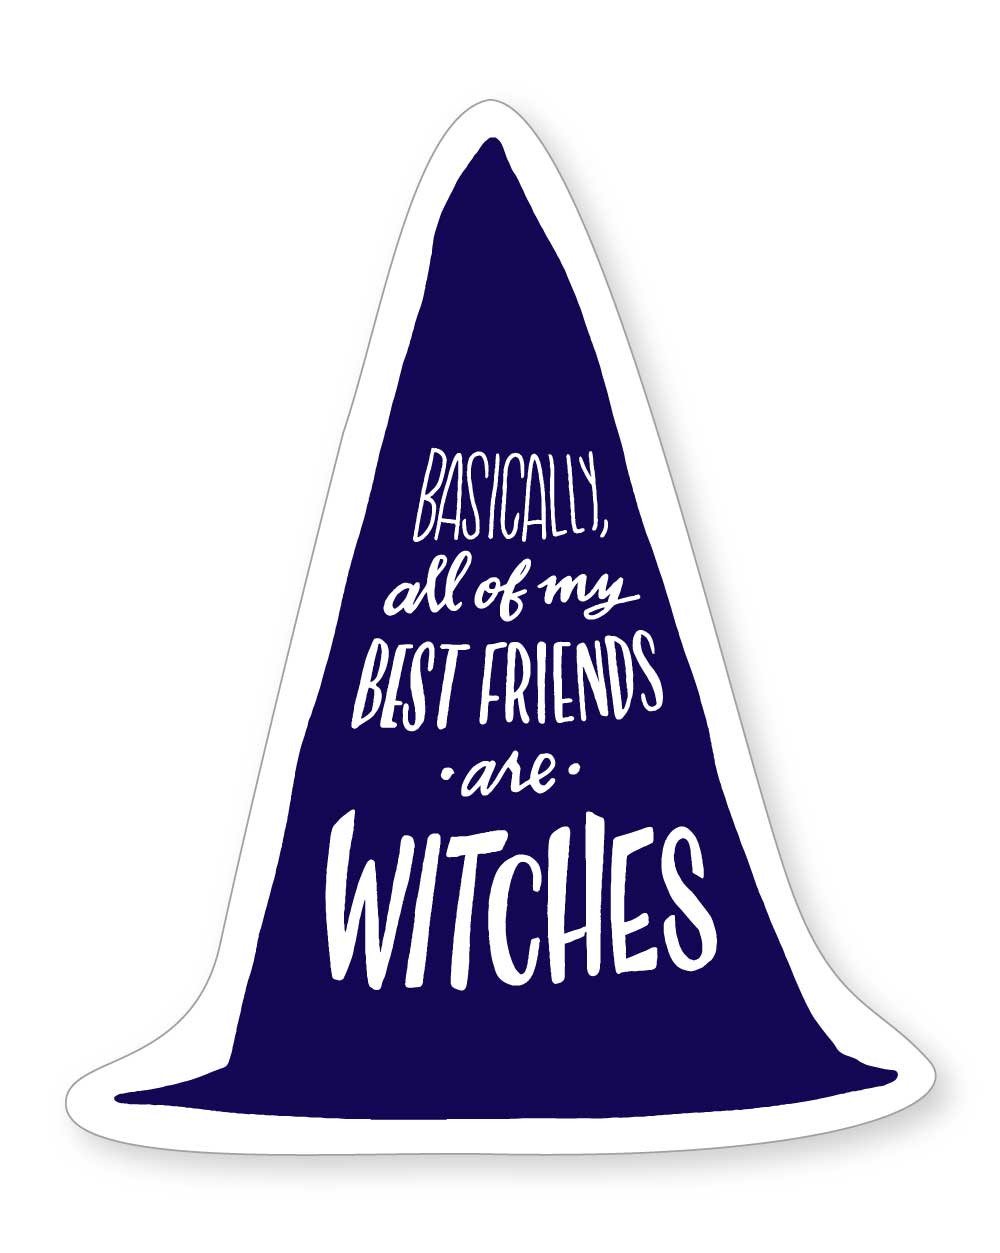 All of My Best Friends are Witches Sticker